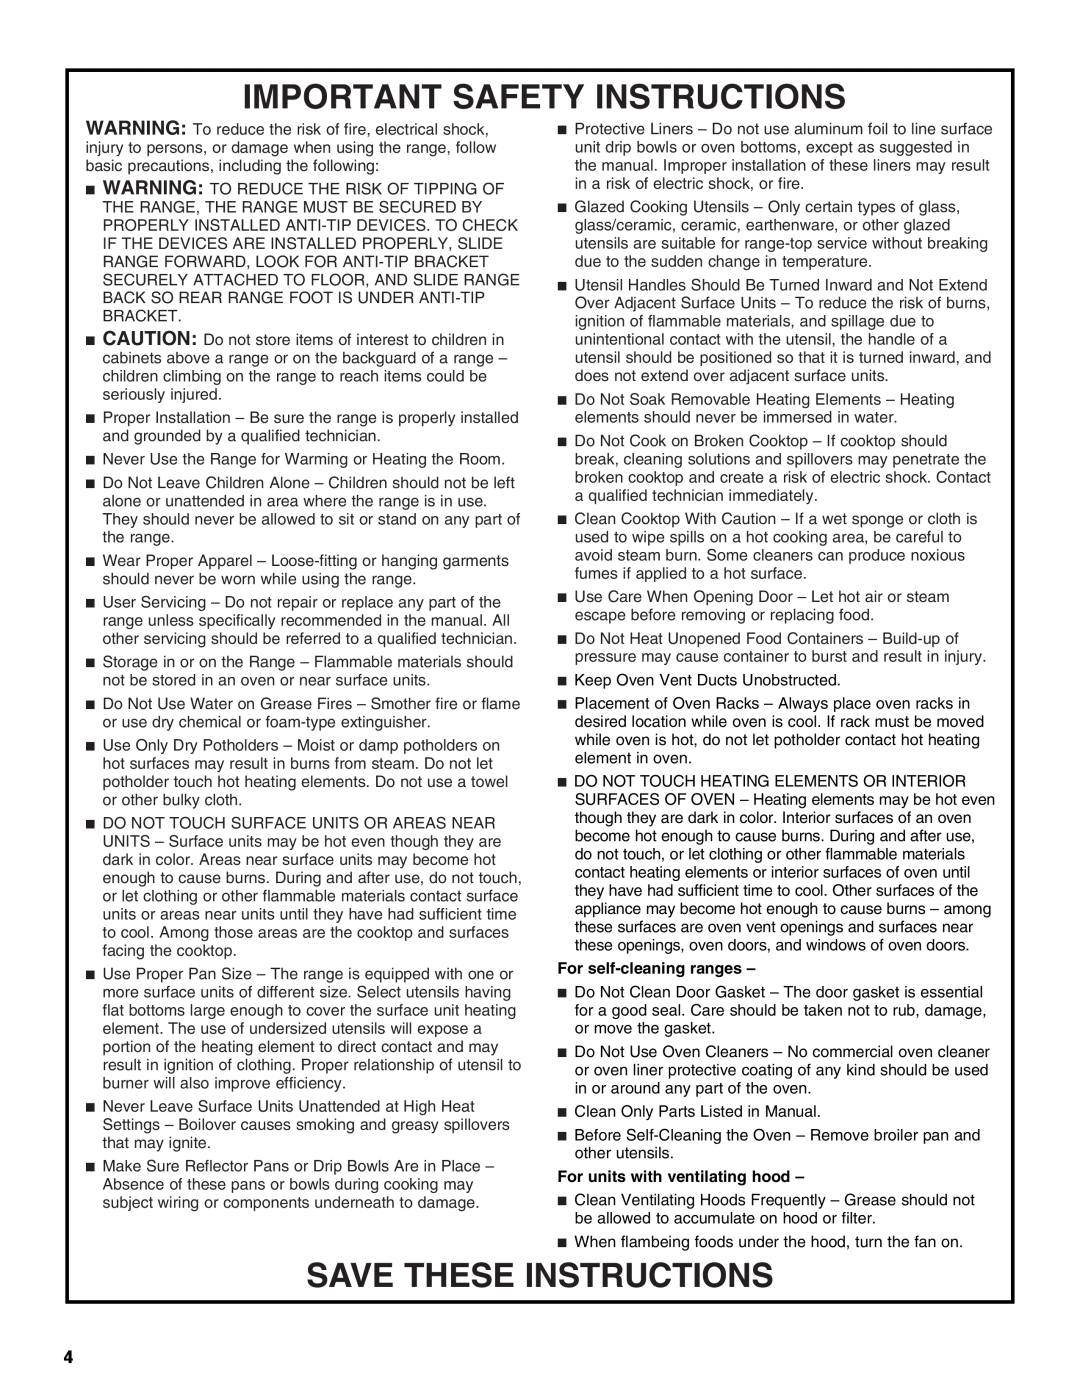 Estate W10017740 manual Important Safety Instructions, Save These Instructions, For self-cleaning ranges 